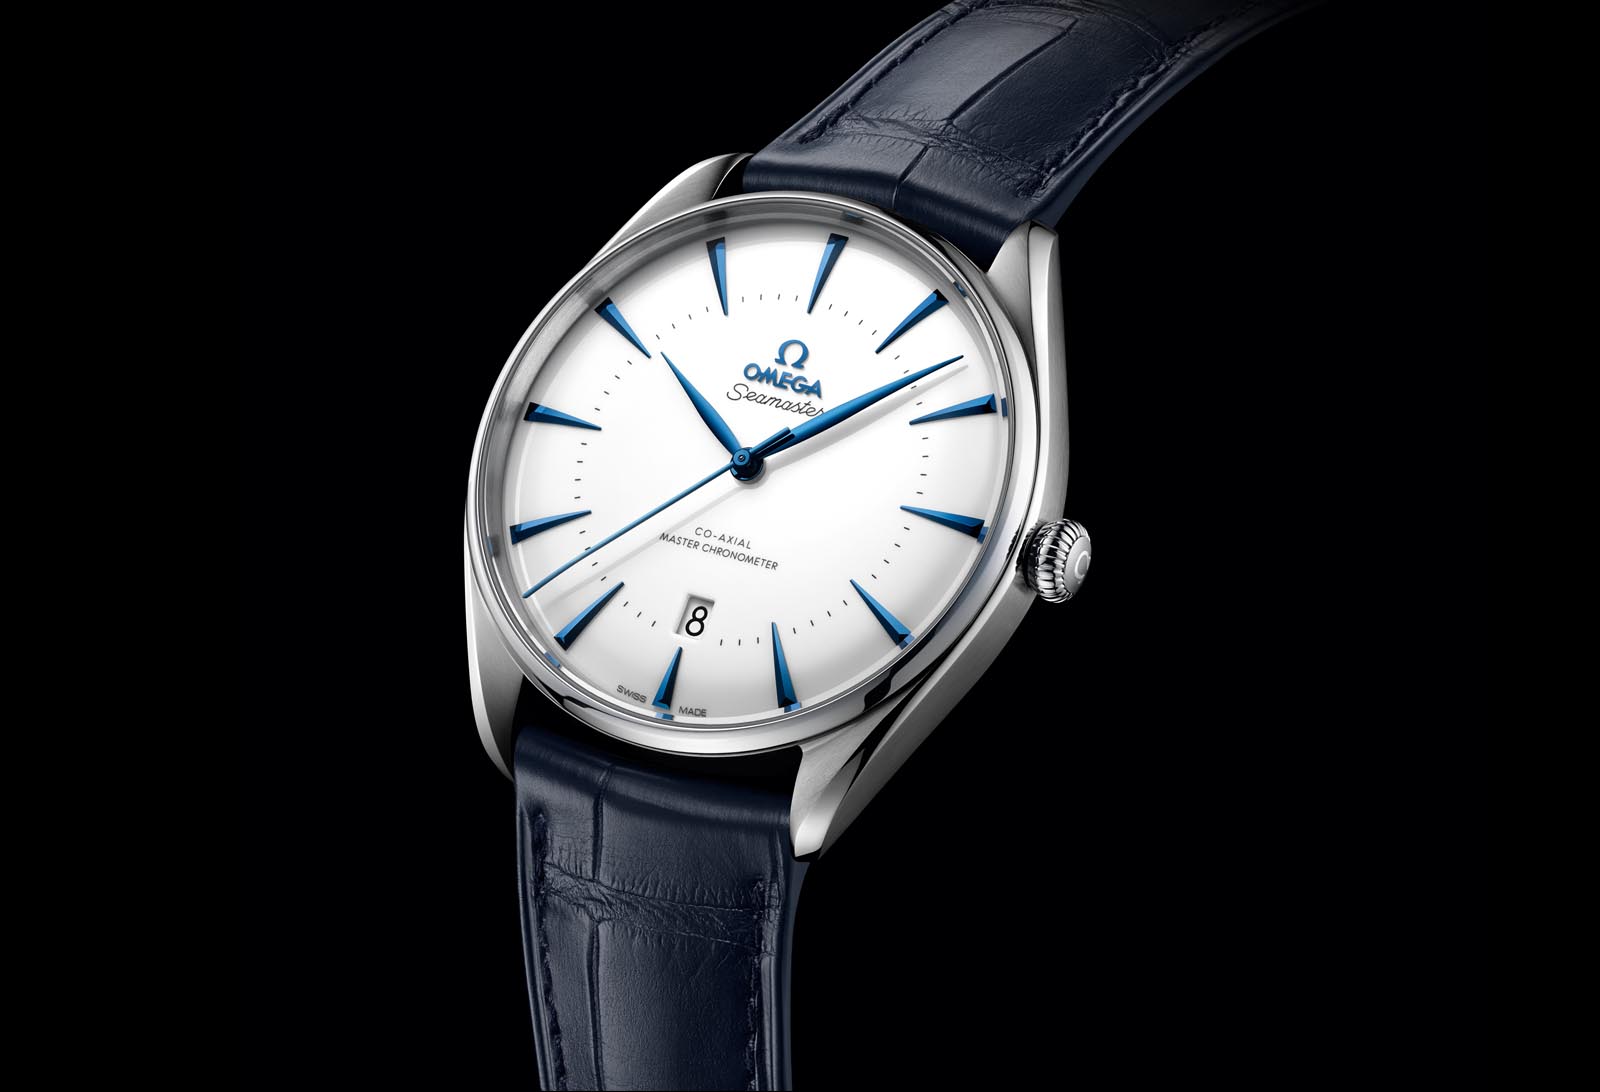 Introducing the Omega Seamaster Singapore Limited Edition Retro style